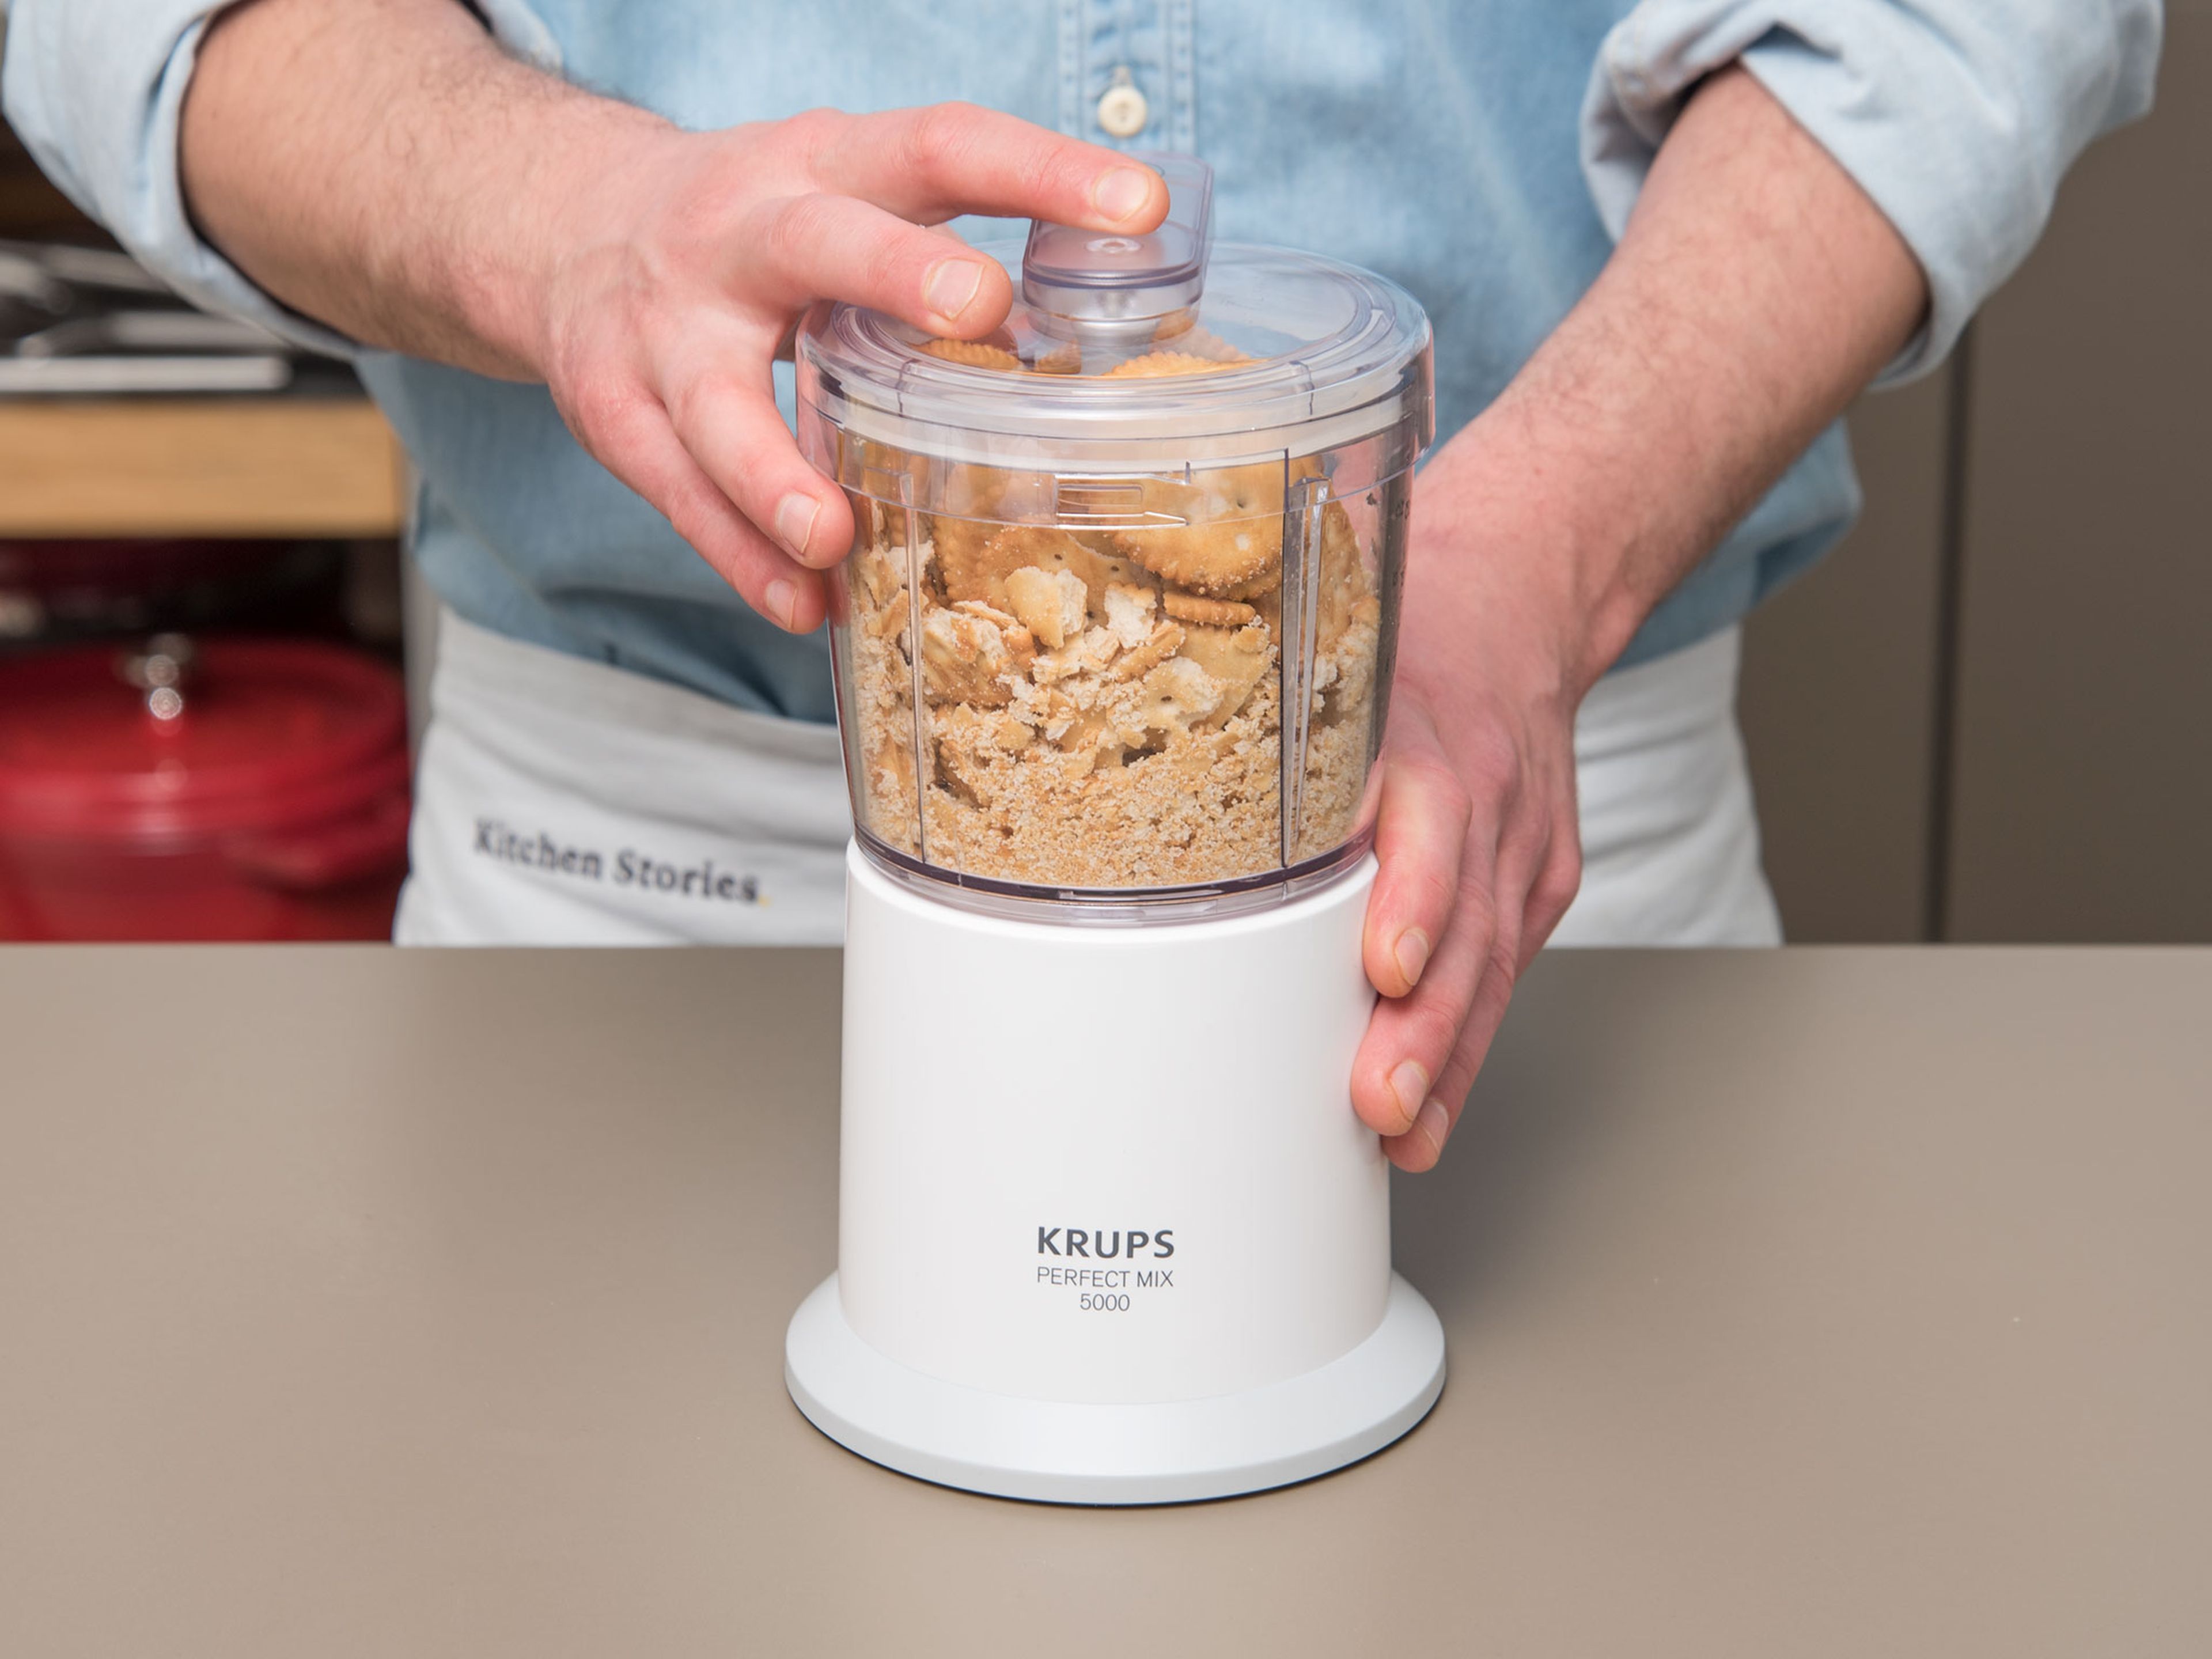 Put the salty crackers in a food processor and finely grind.